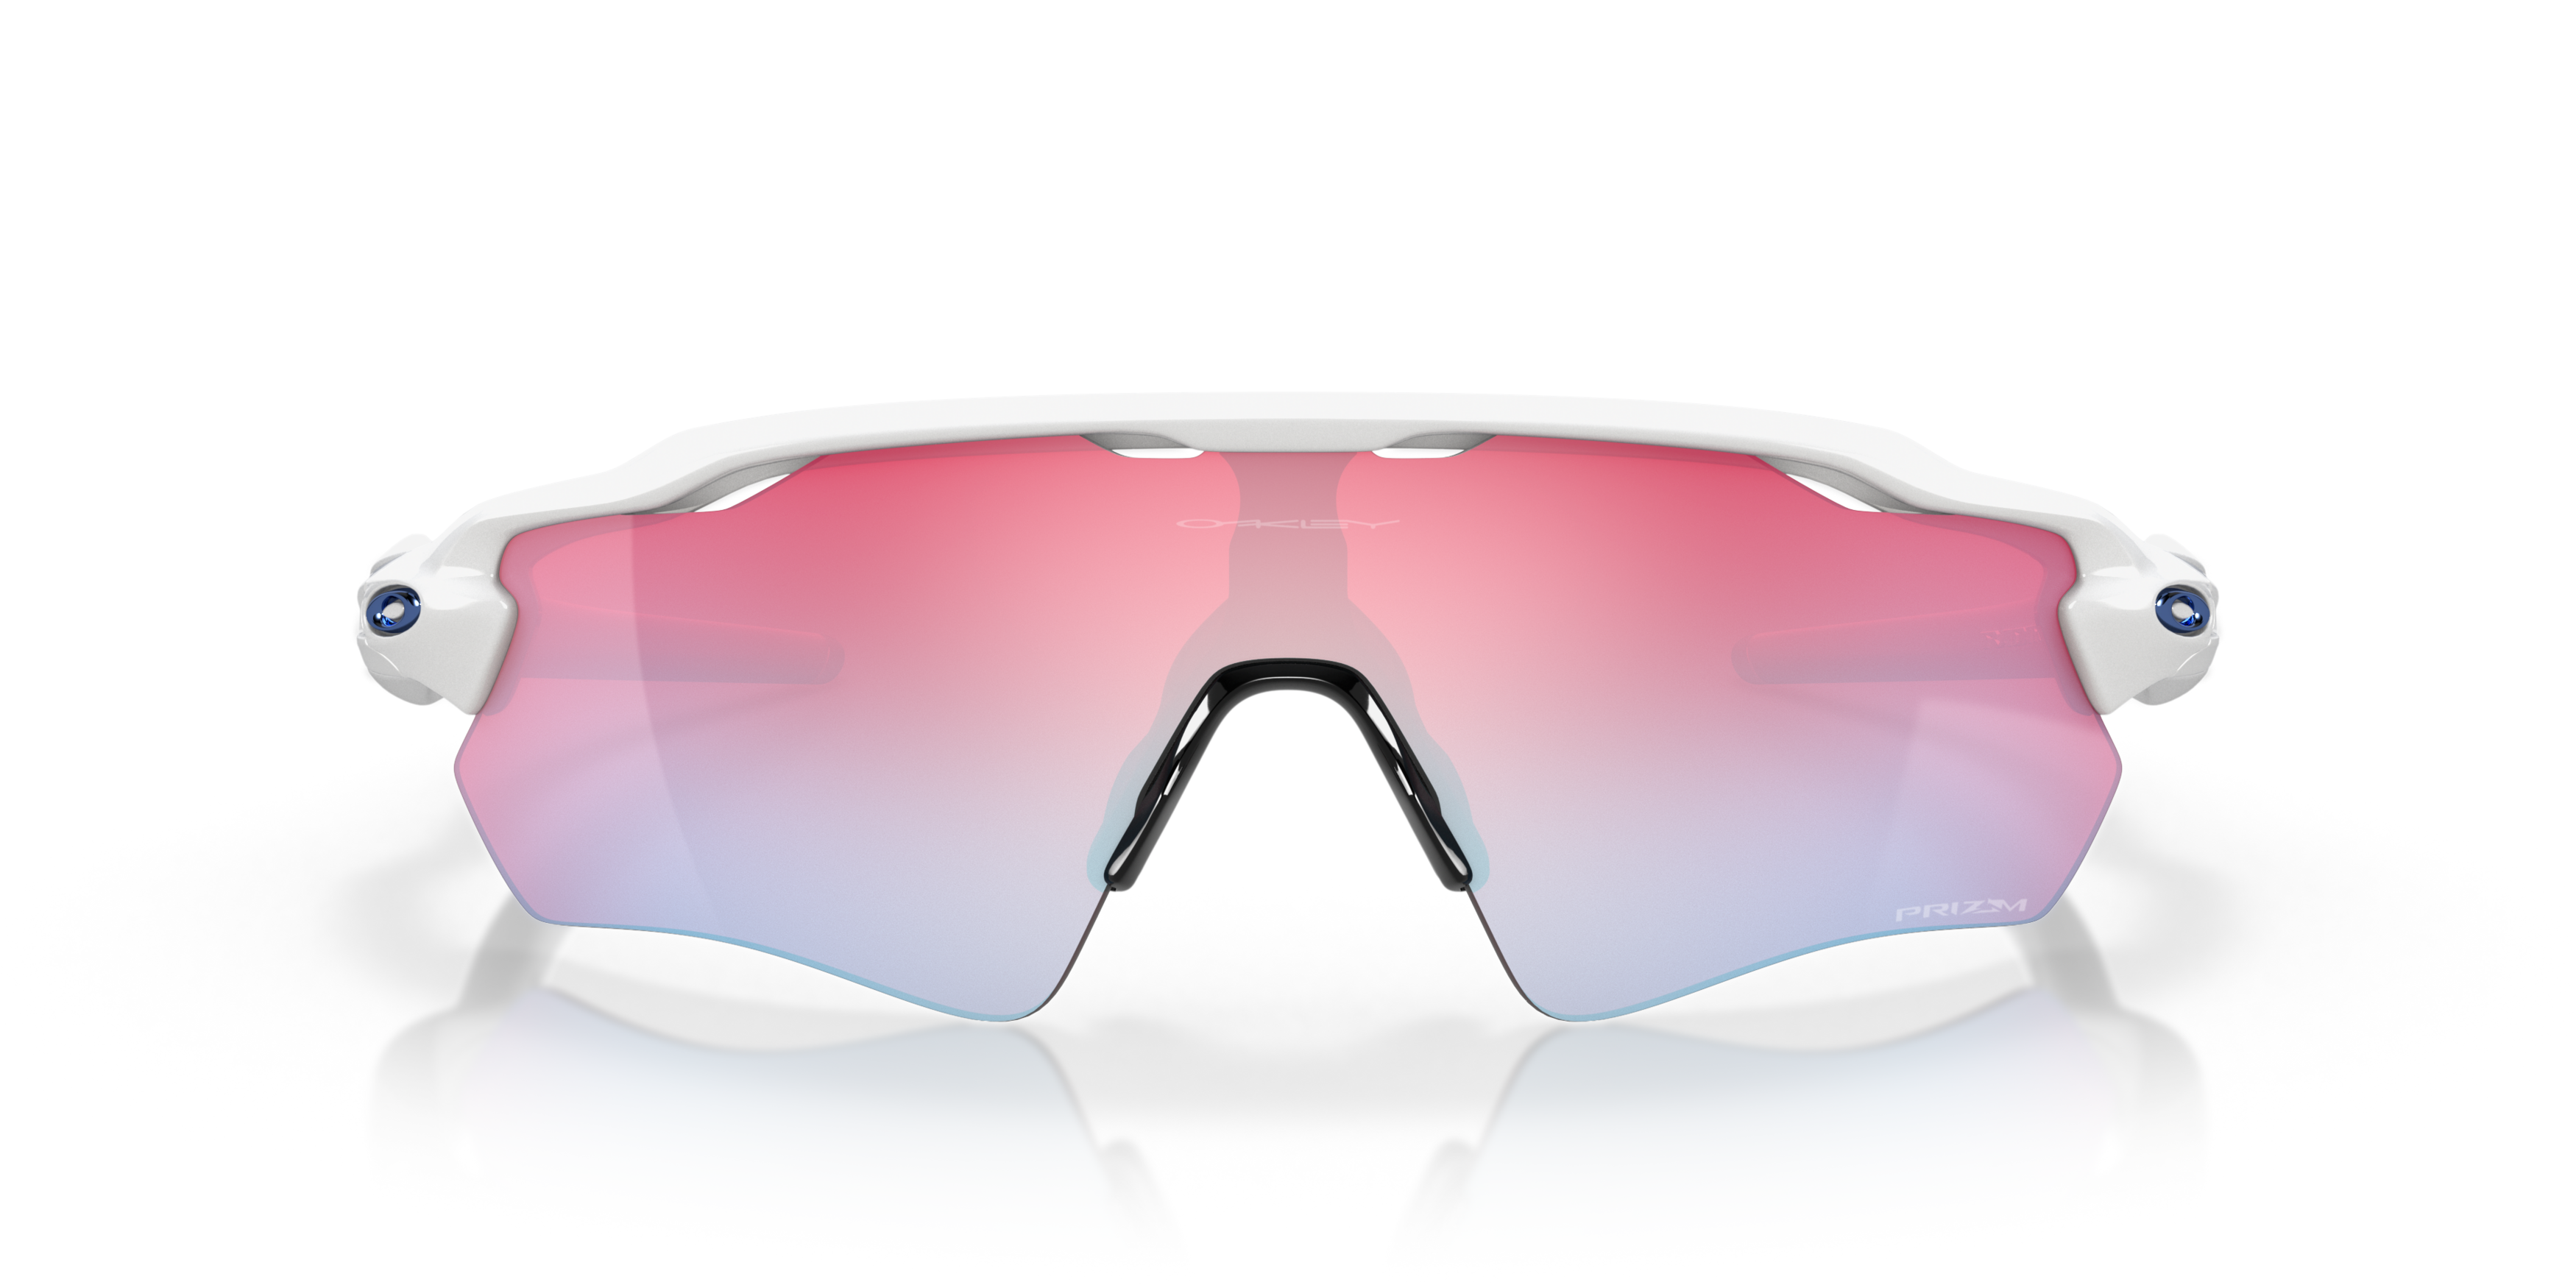 [products.image.front] Oakley 0OO9208 920847 Solbriller